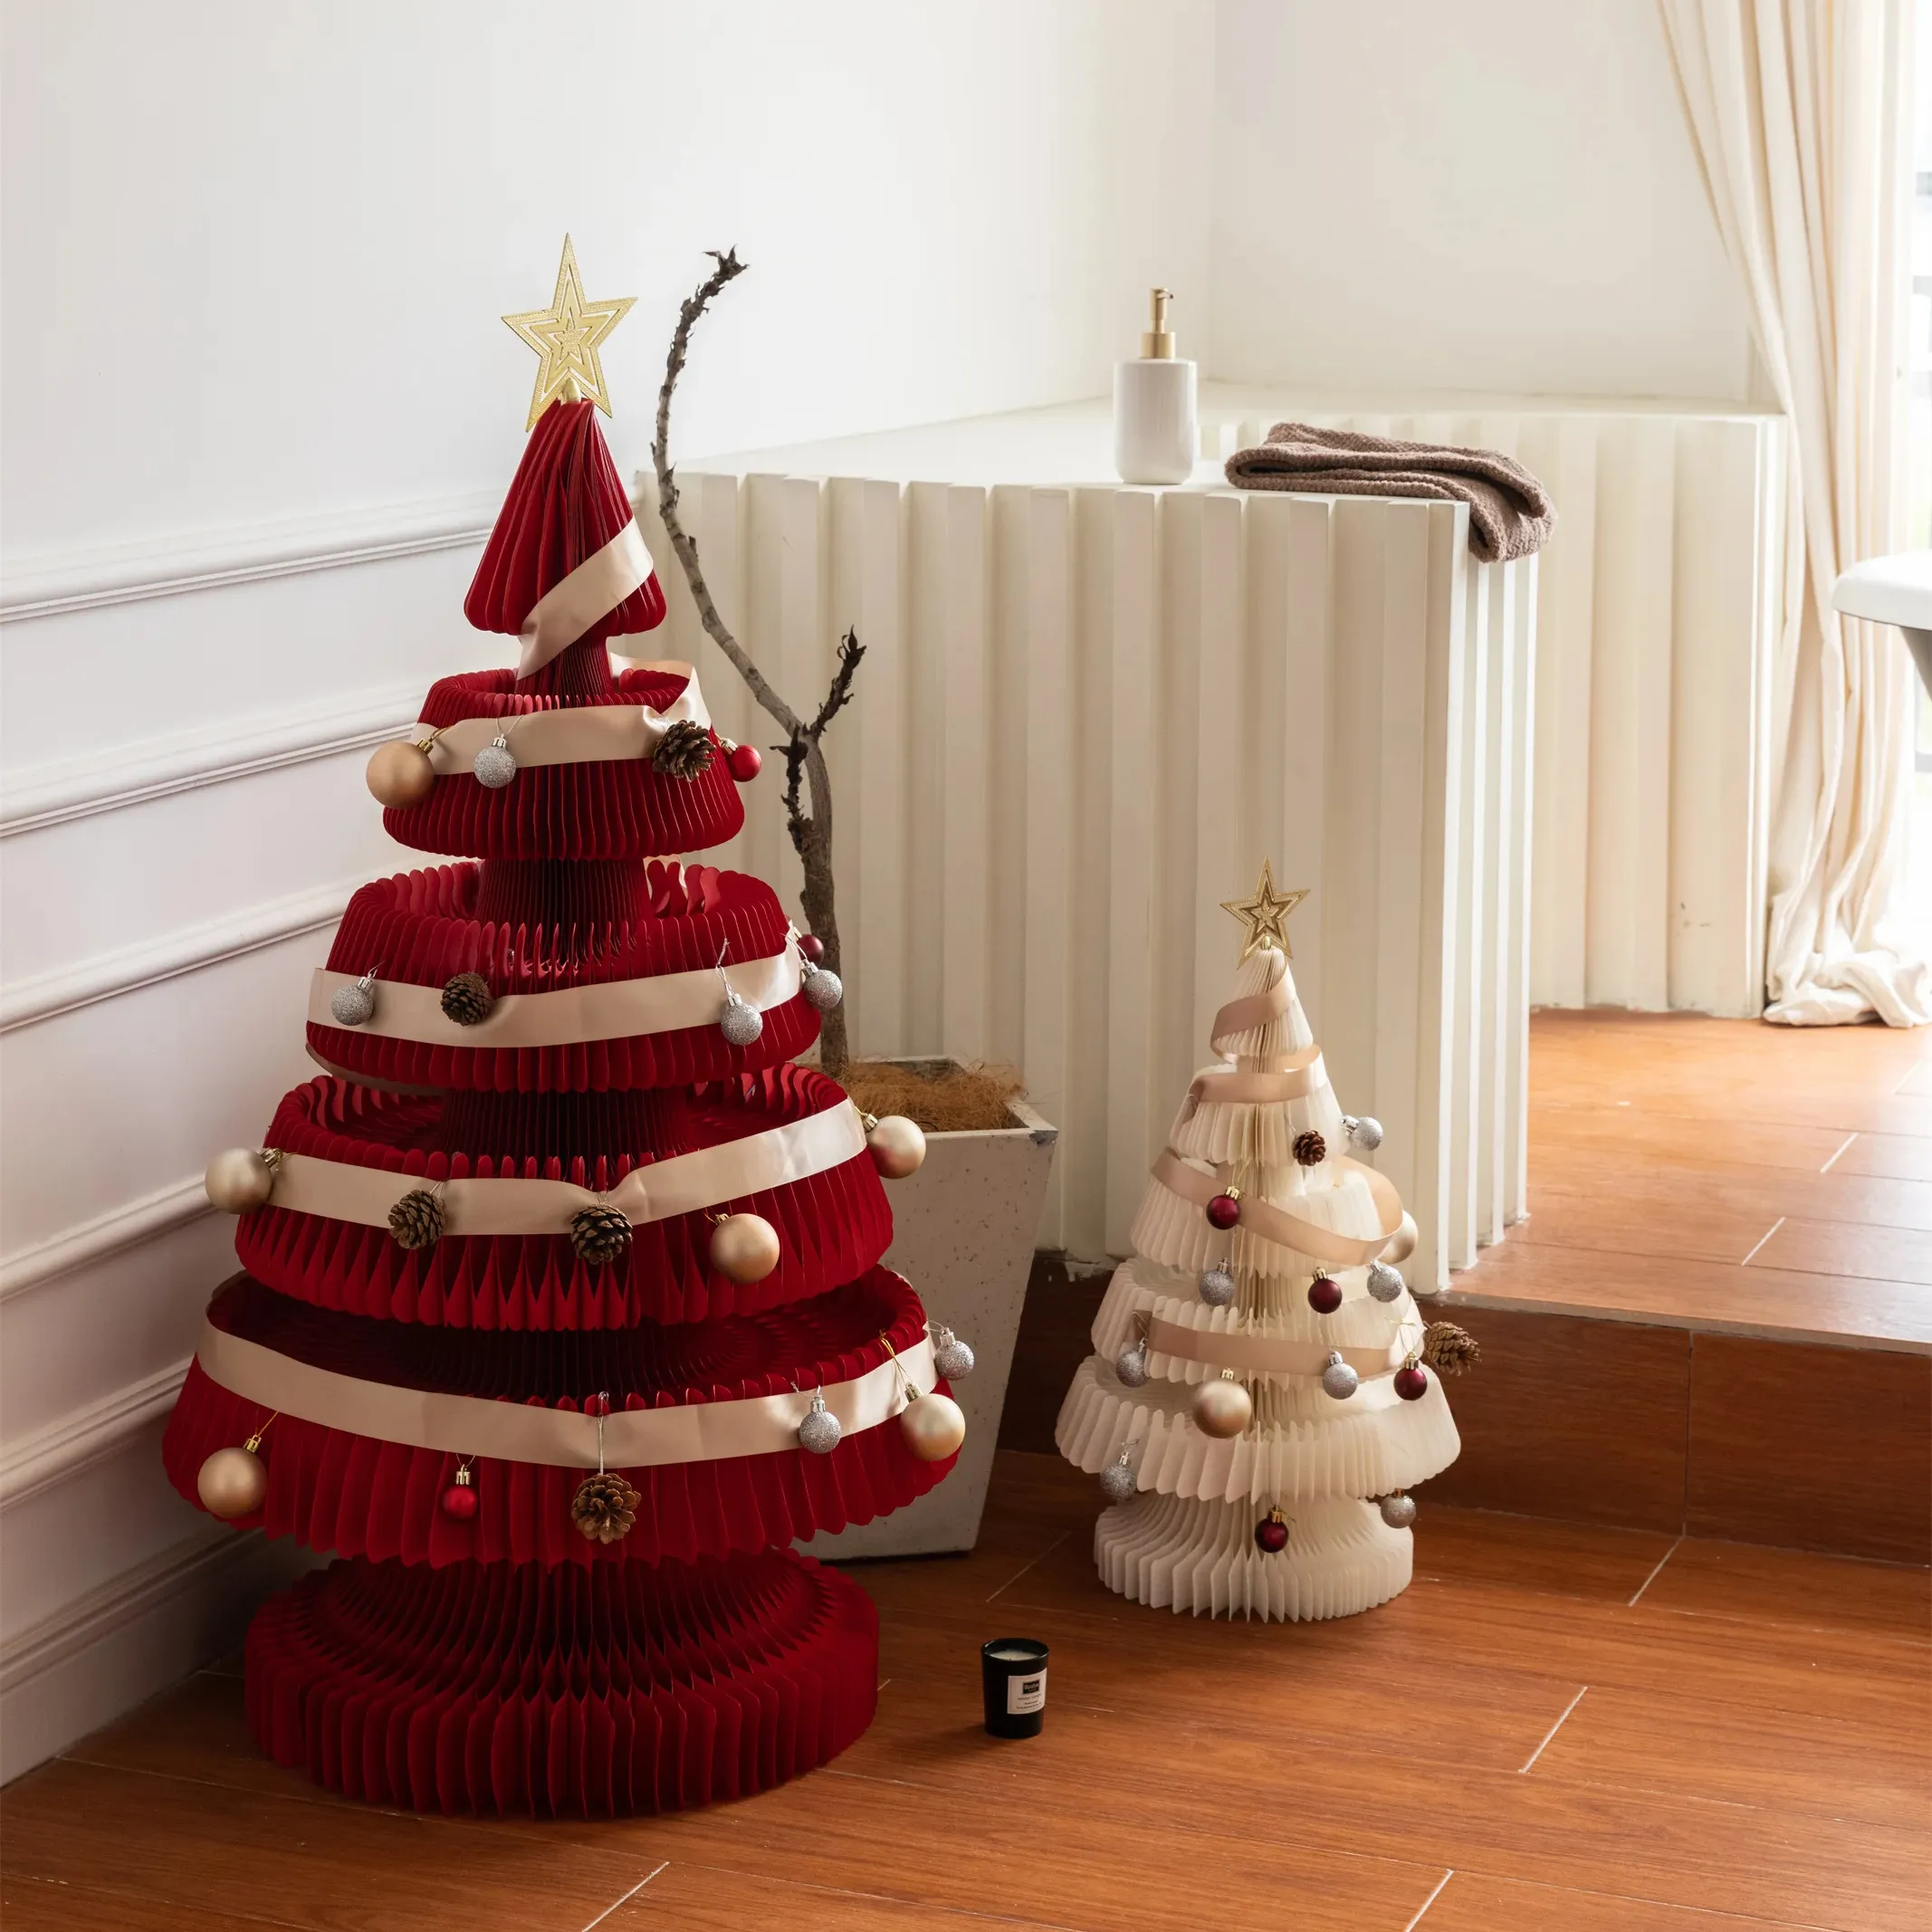 Foldable Christmas Tree Make Of Kraft Paper 39 inch Height Paper Xmas Tree With LED Light For Home And Commercial Used